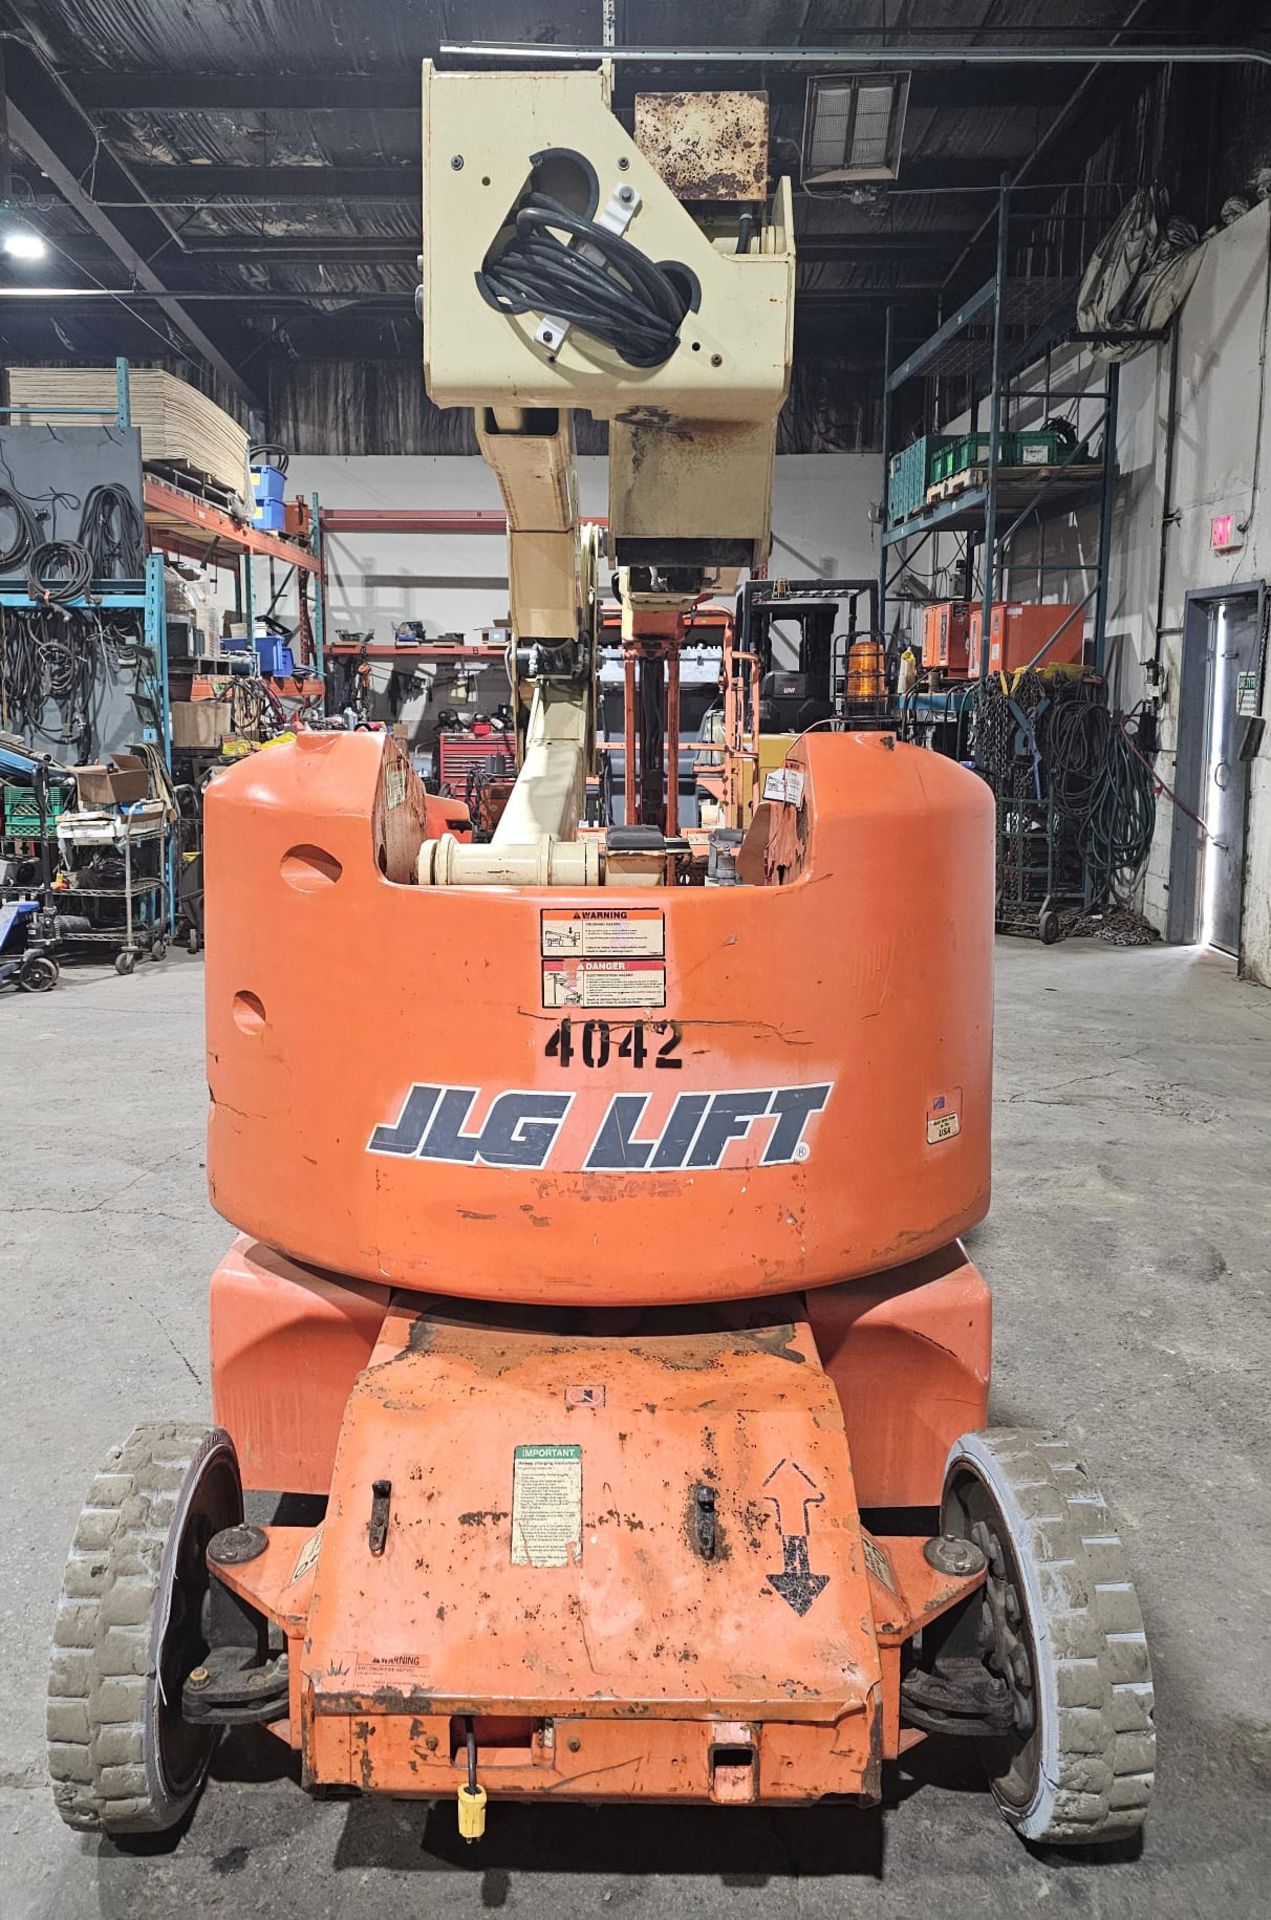 2006 JLG LIFT E400AJP Articulating Zoom Boom Lift - Narrow 500 lbs VERY LOW HOURS - 40ft lift height - Image 7 of 9